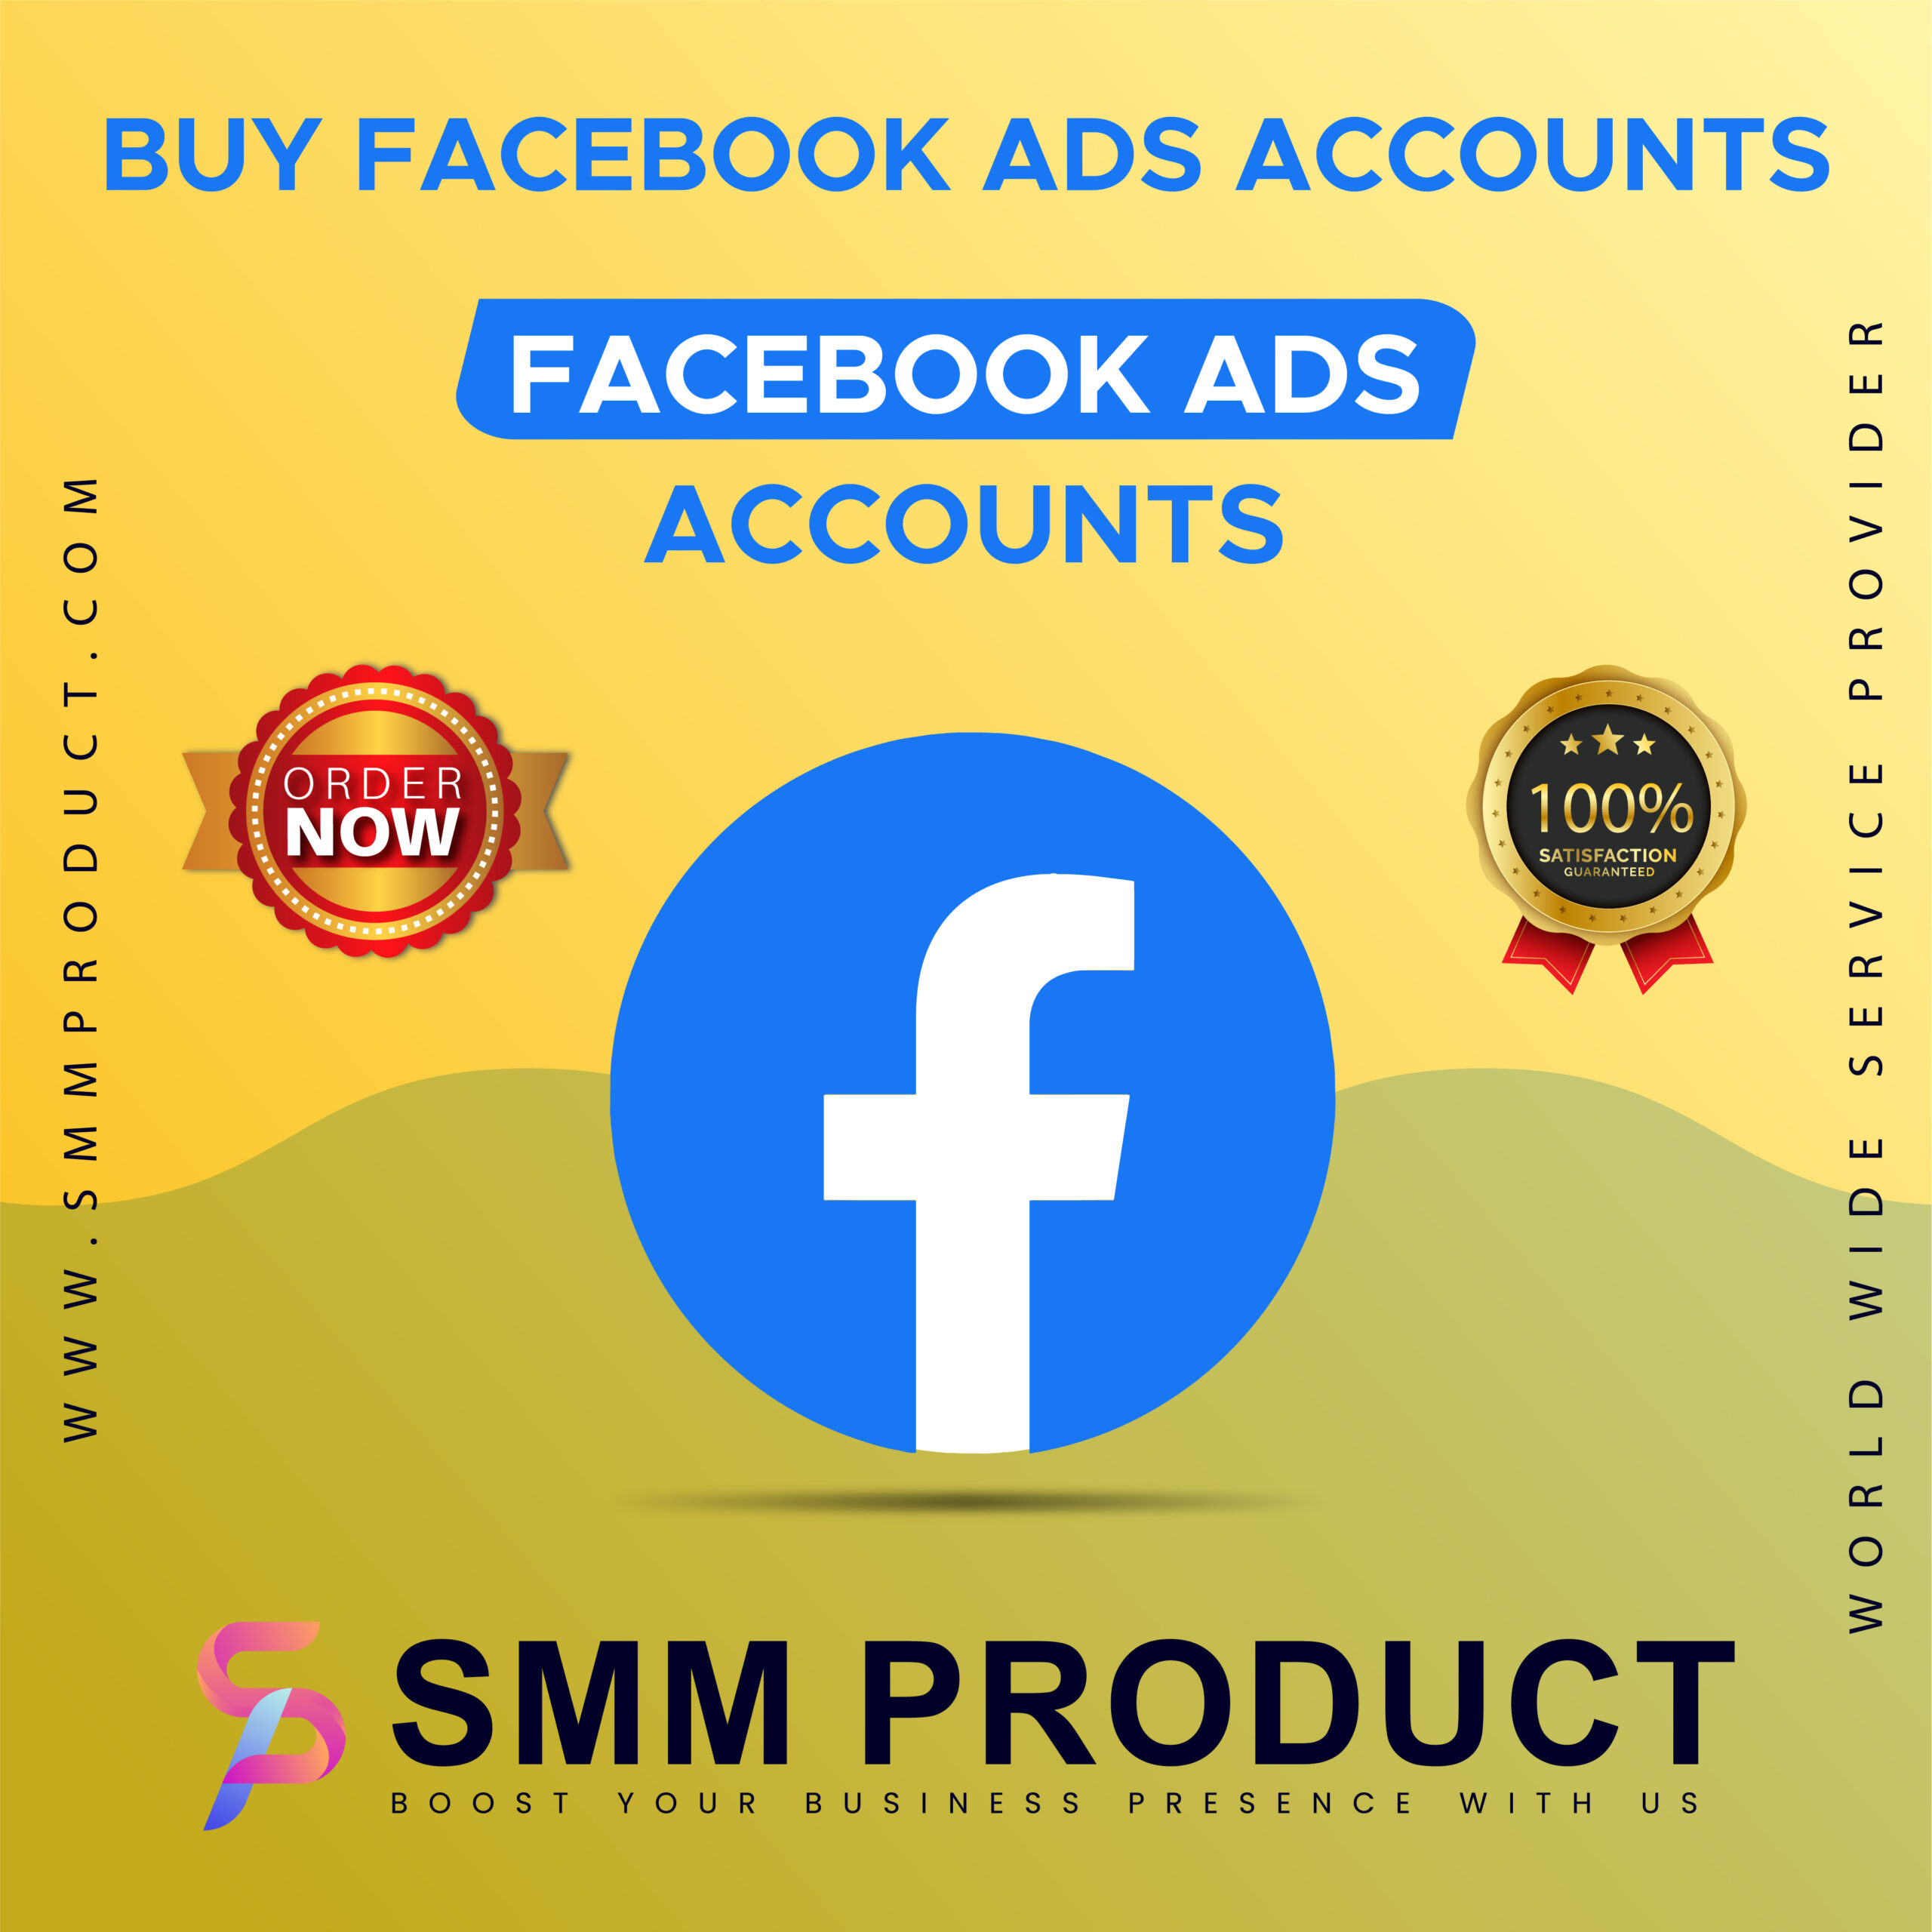 Buy Facebook Ads Accounts - 100% Best Quality Accounts...